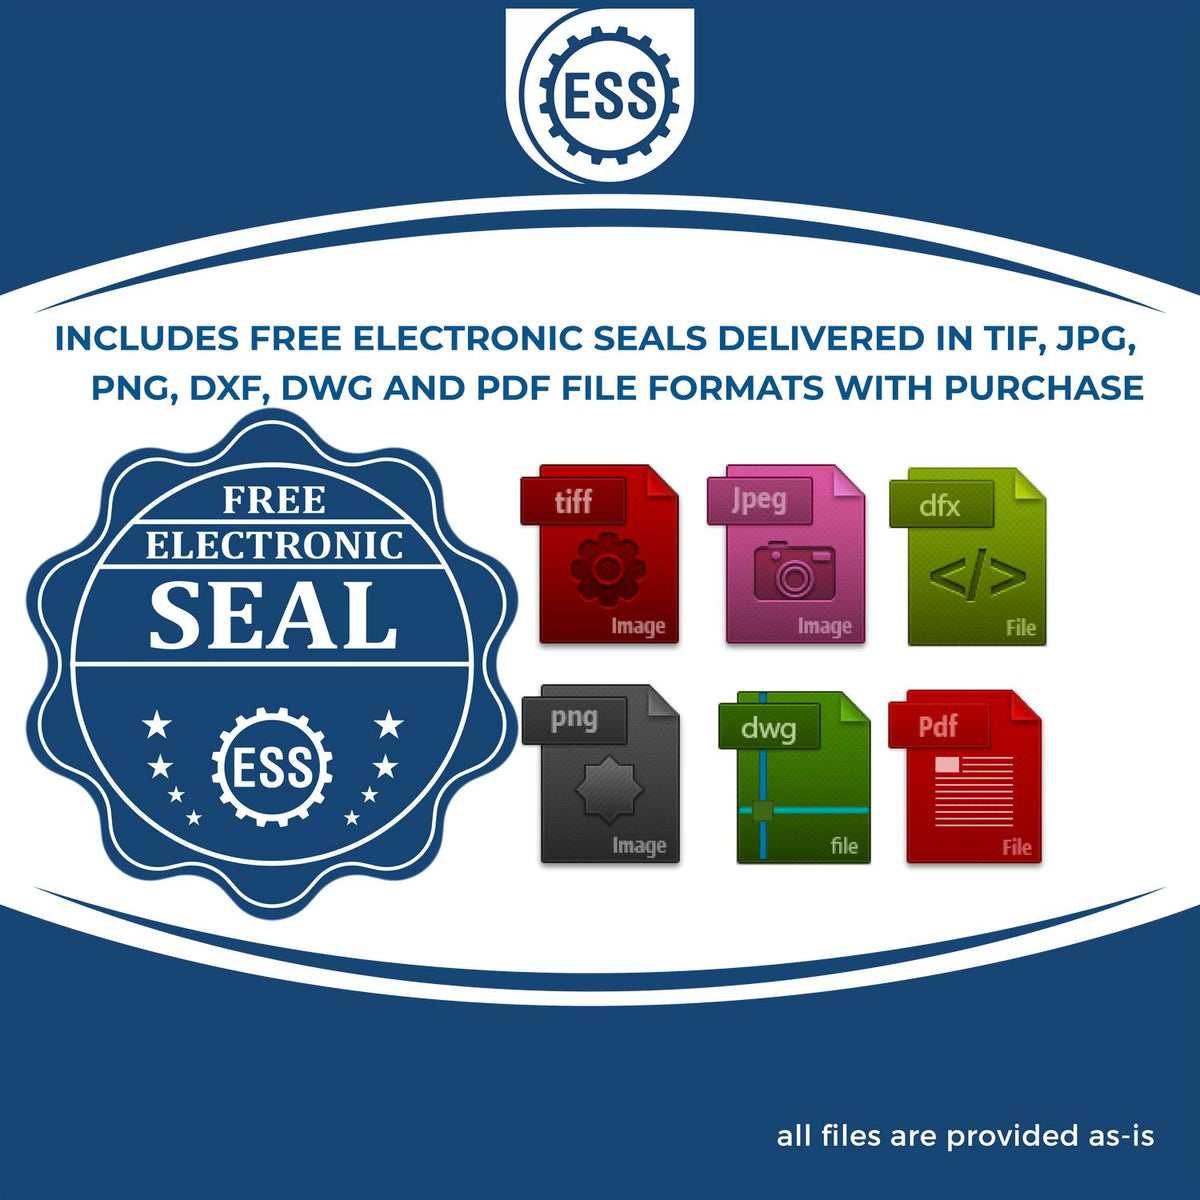 An infographic for the free electronic seal for the Guam Professional Engineer Seal Stamp illustrating the different file type icons such as DXF, DWG, TIF, JPG and PNG.